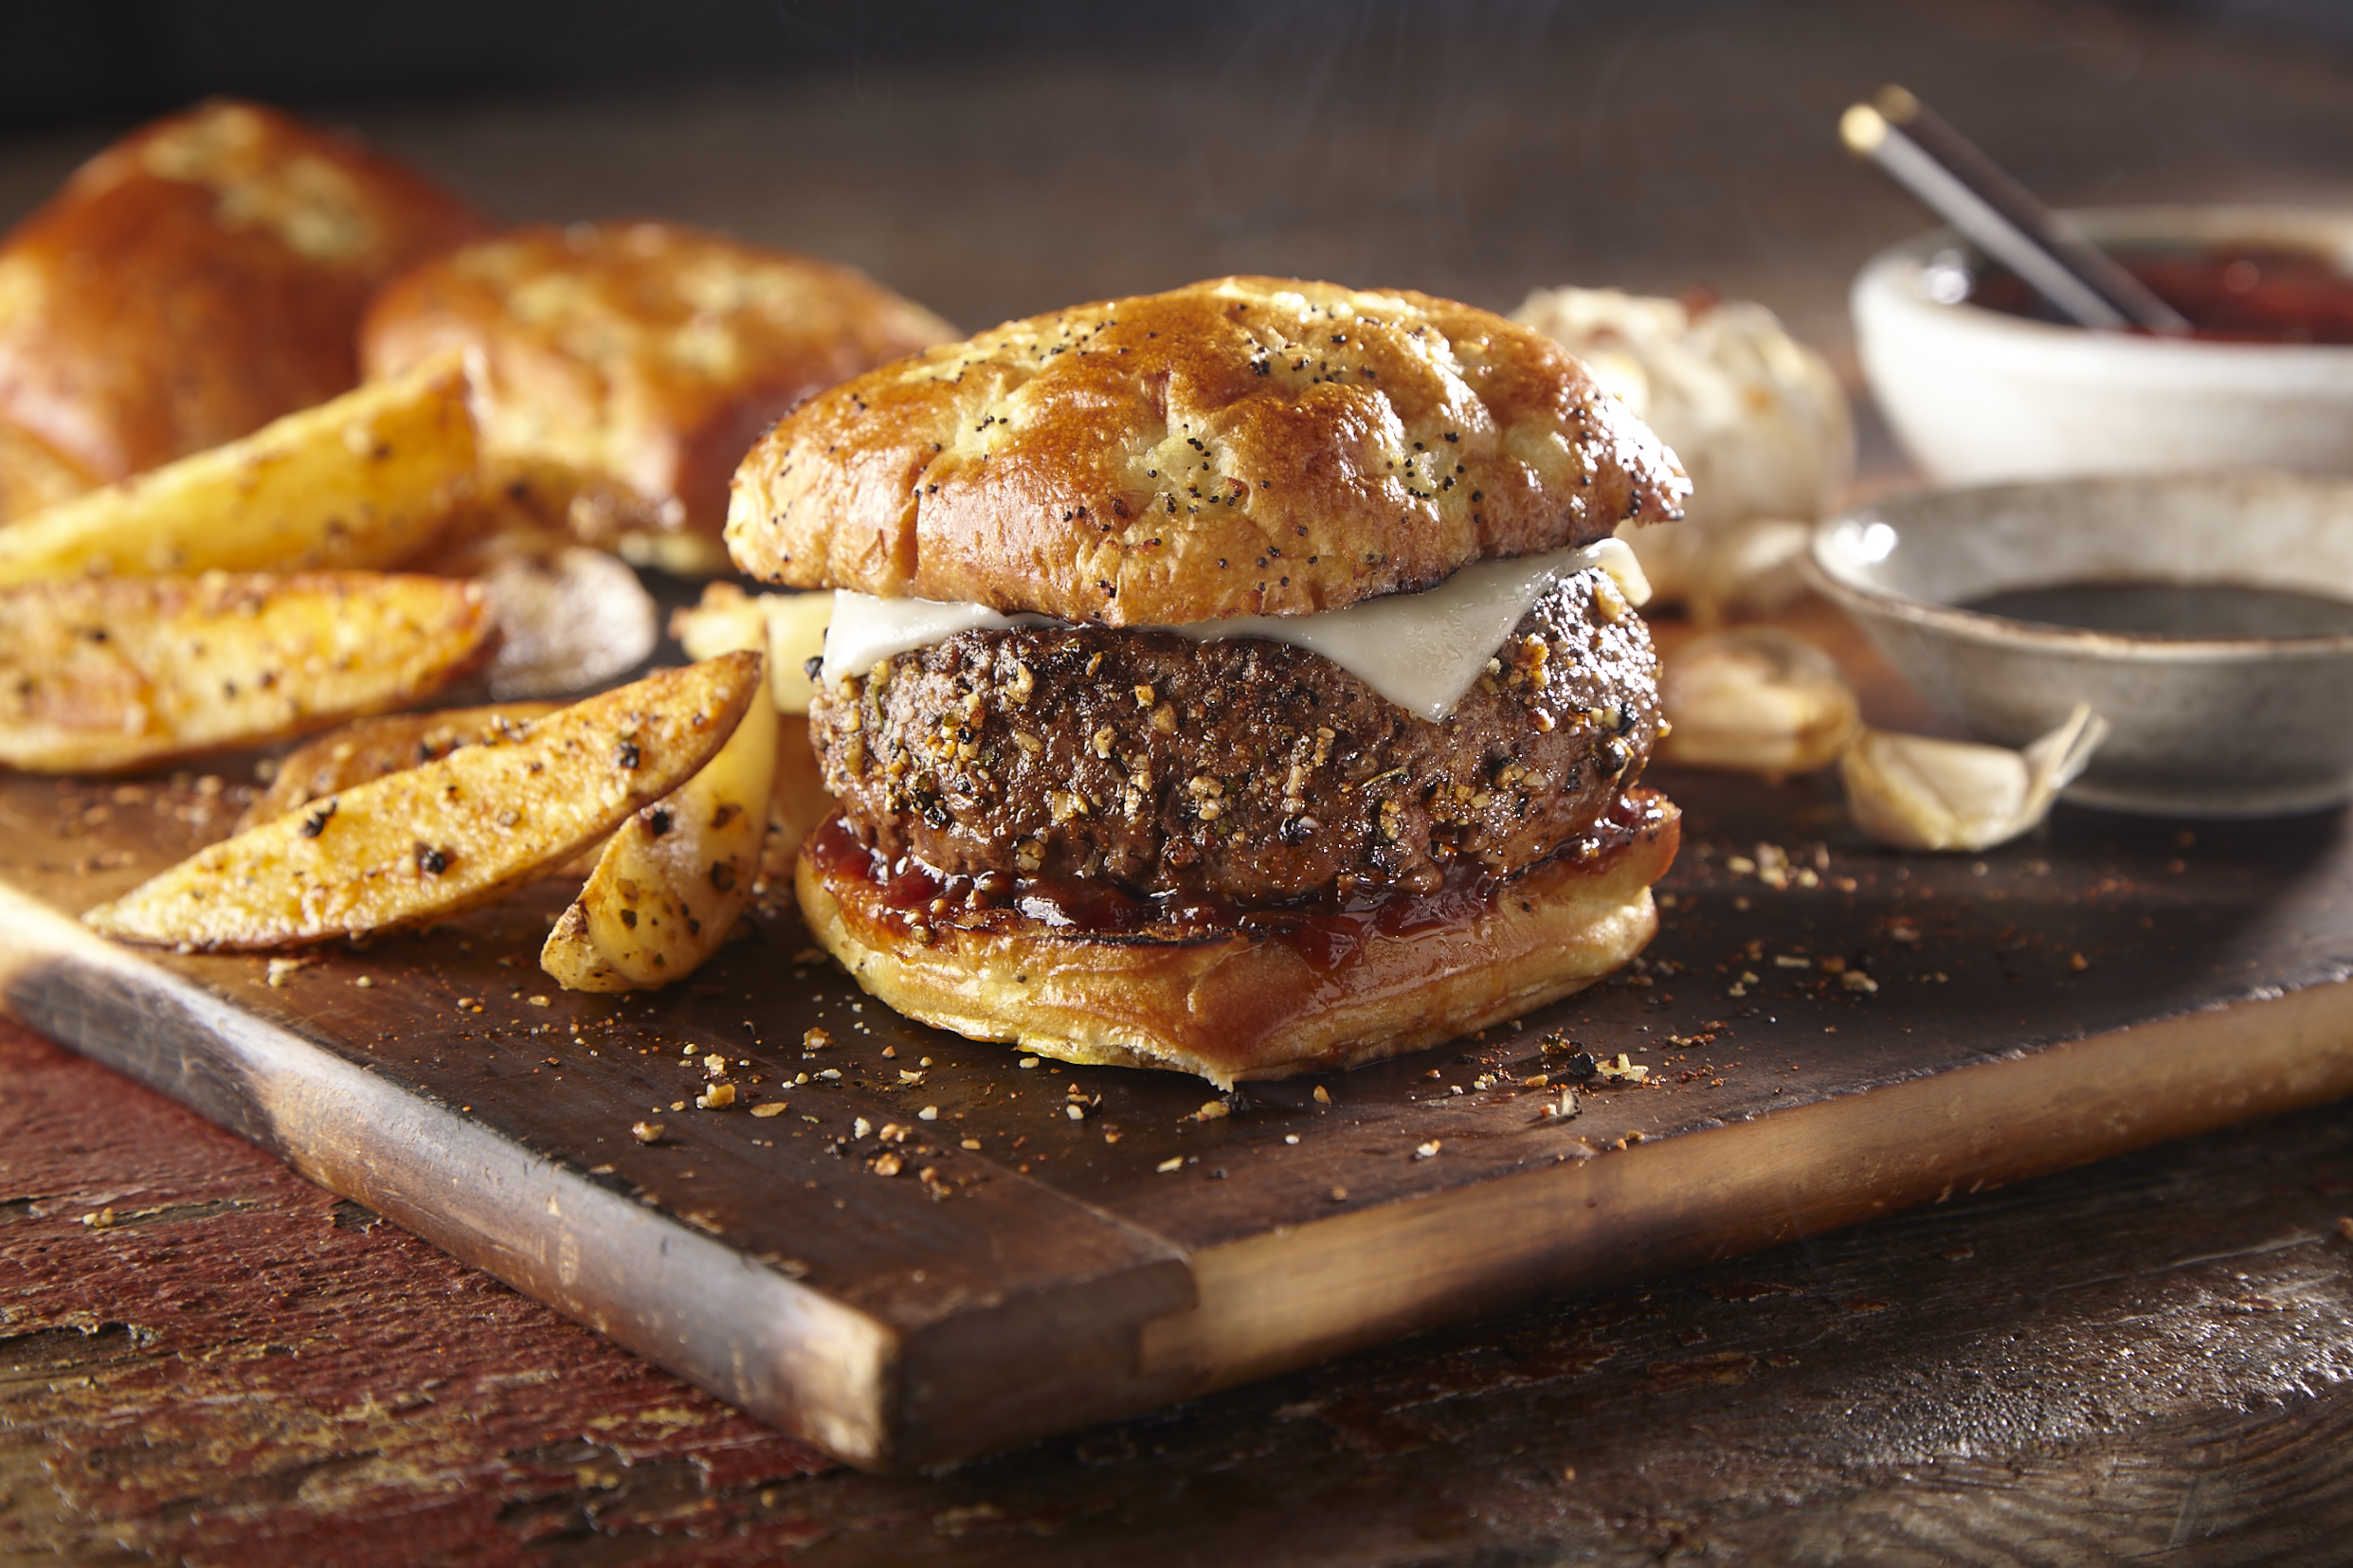 The Best Gourmet Burger Recipe for Memorial Day and Every Day!